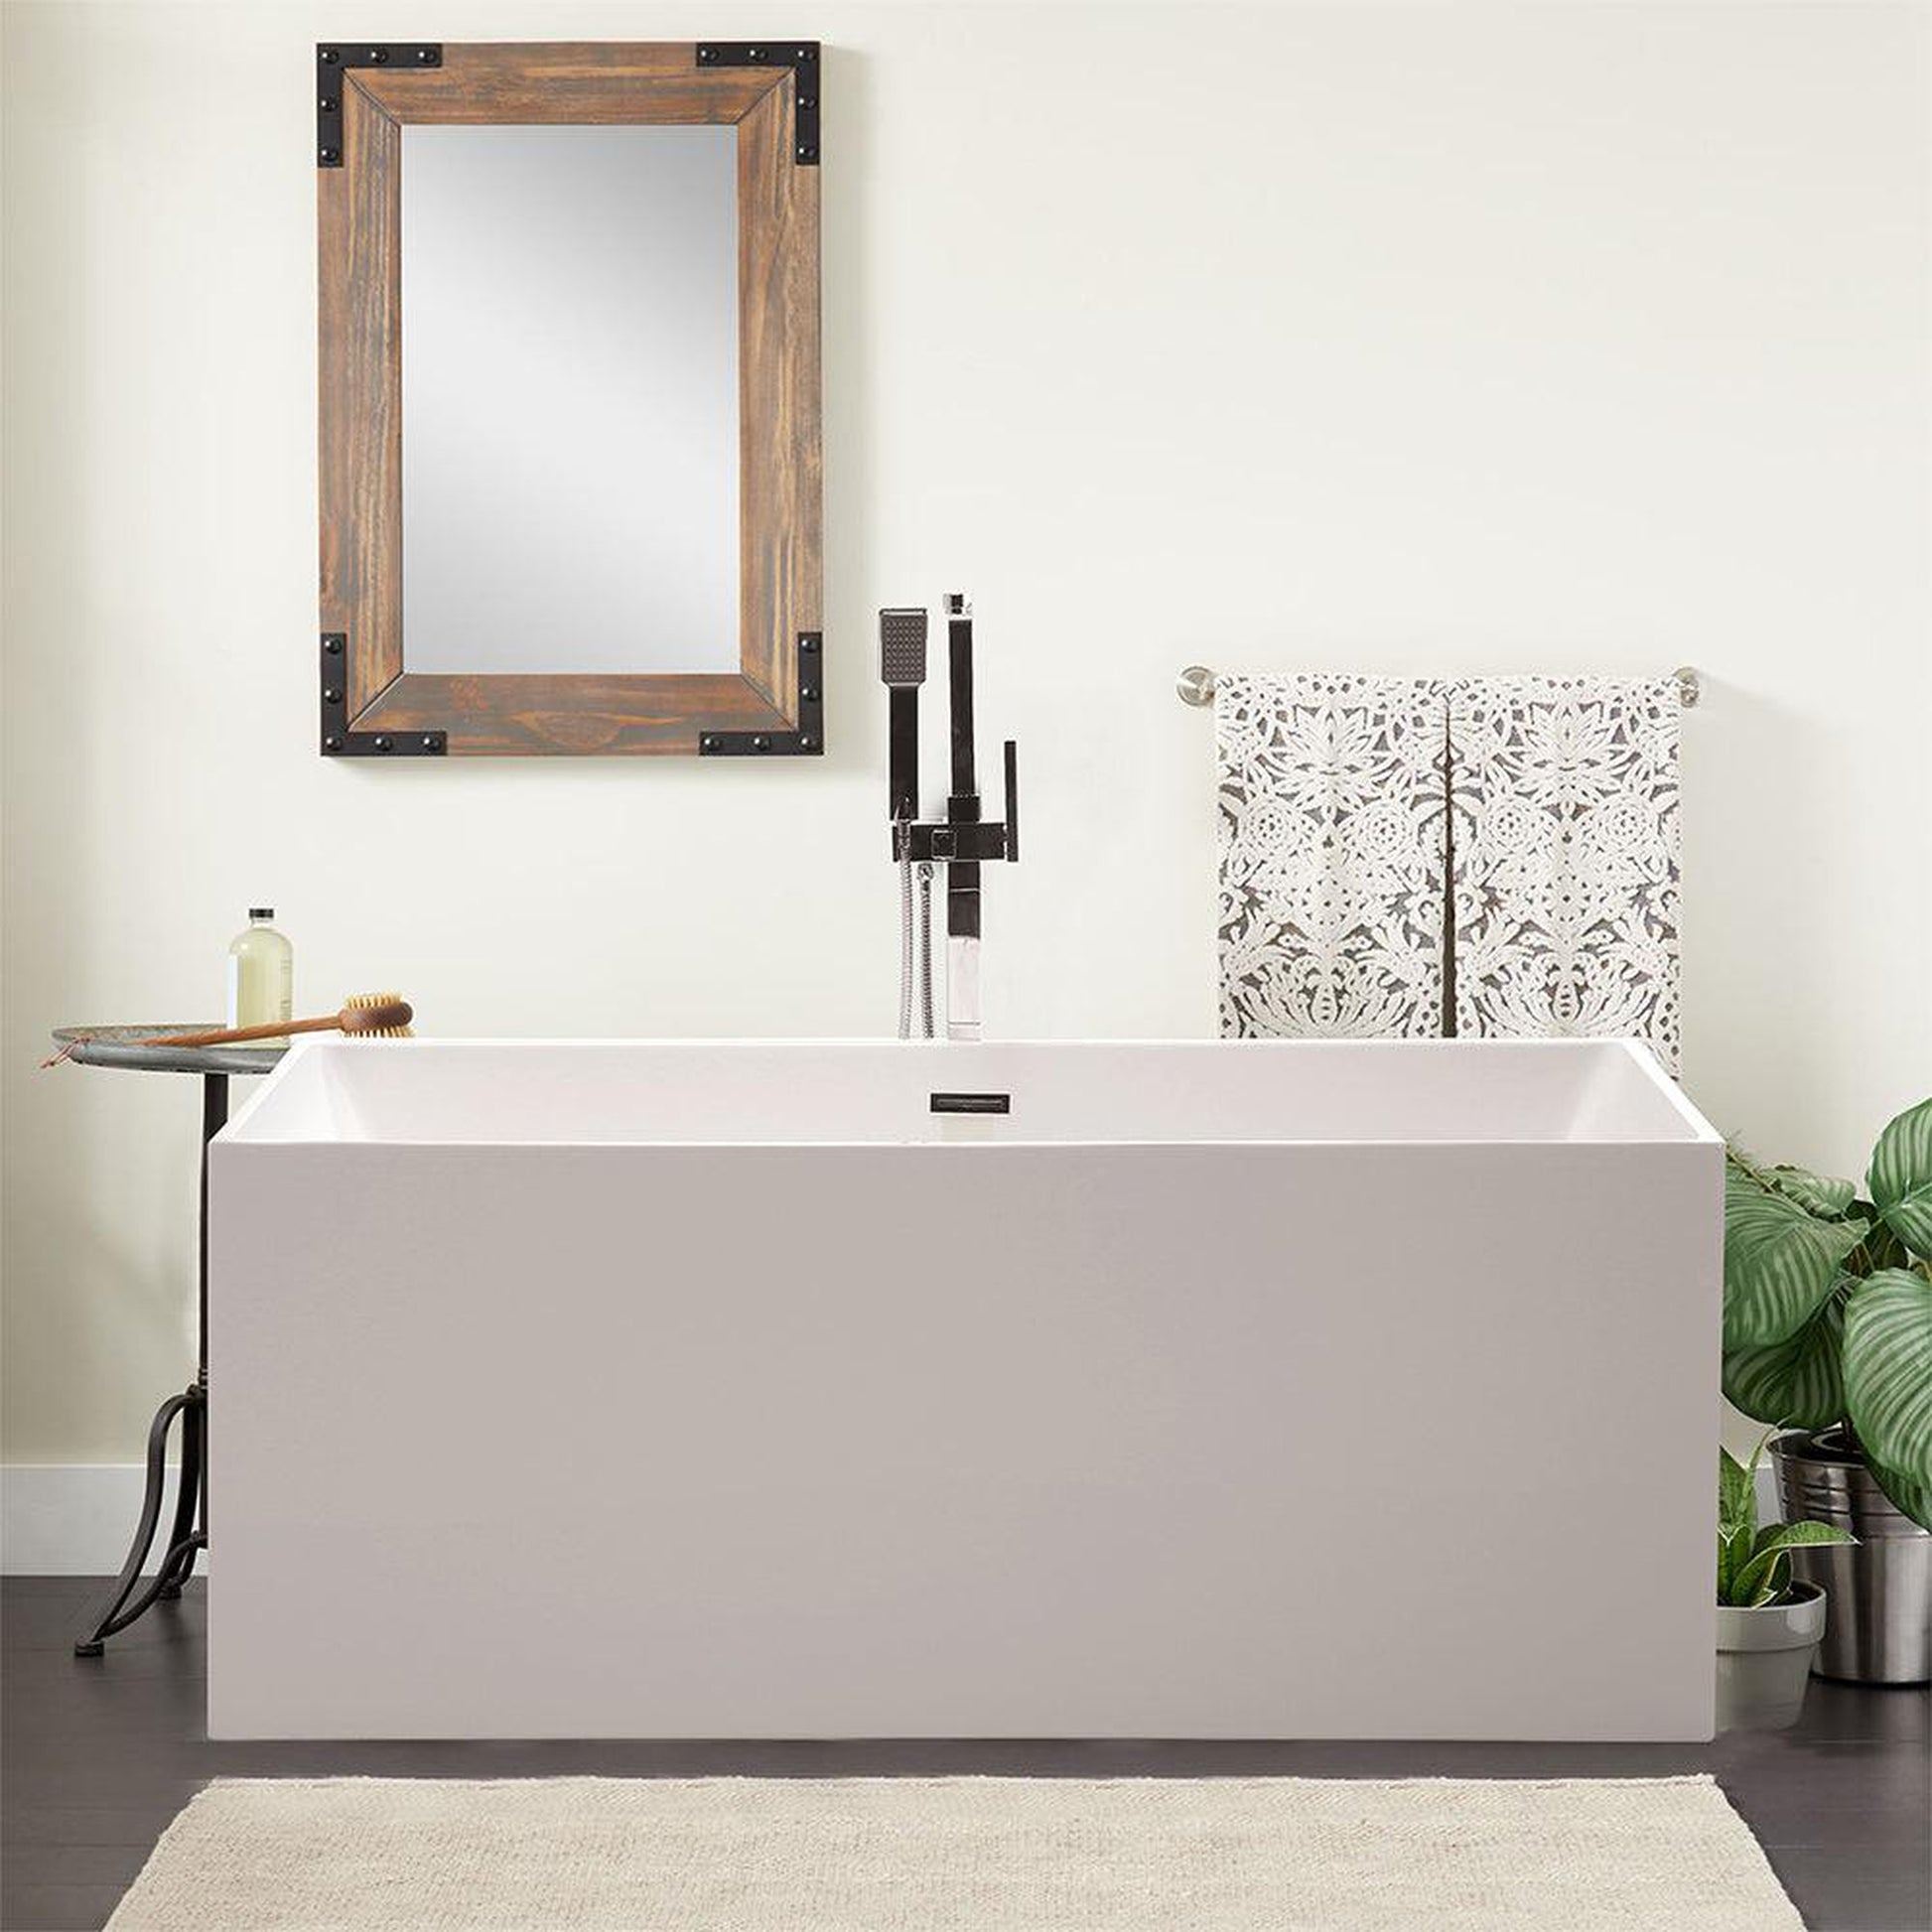 Vanity Art 59" x 30" White Rectangle Acrylic Modern Stand Alone Soaking Tub With Polished Chrome Pop-up Drain, Slotted Overflow and Flexible Drain Hose